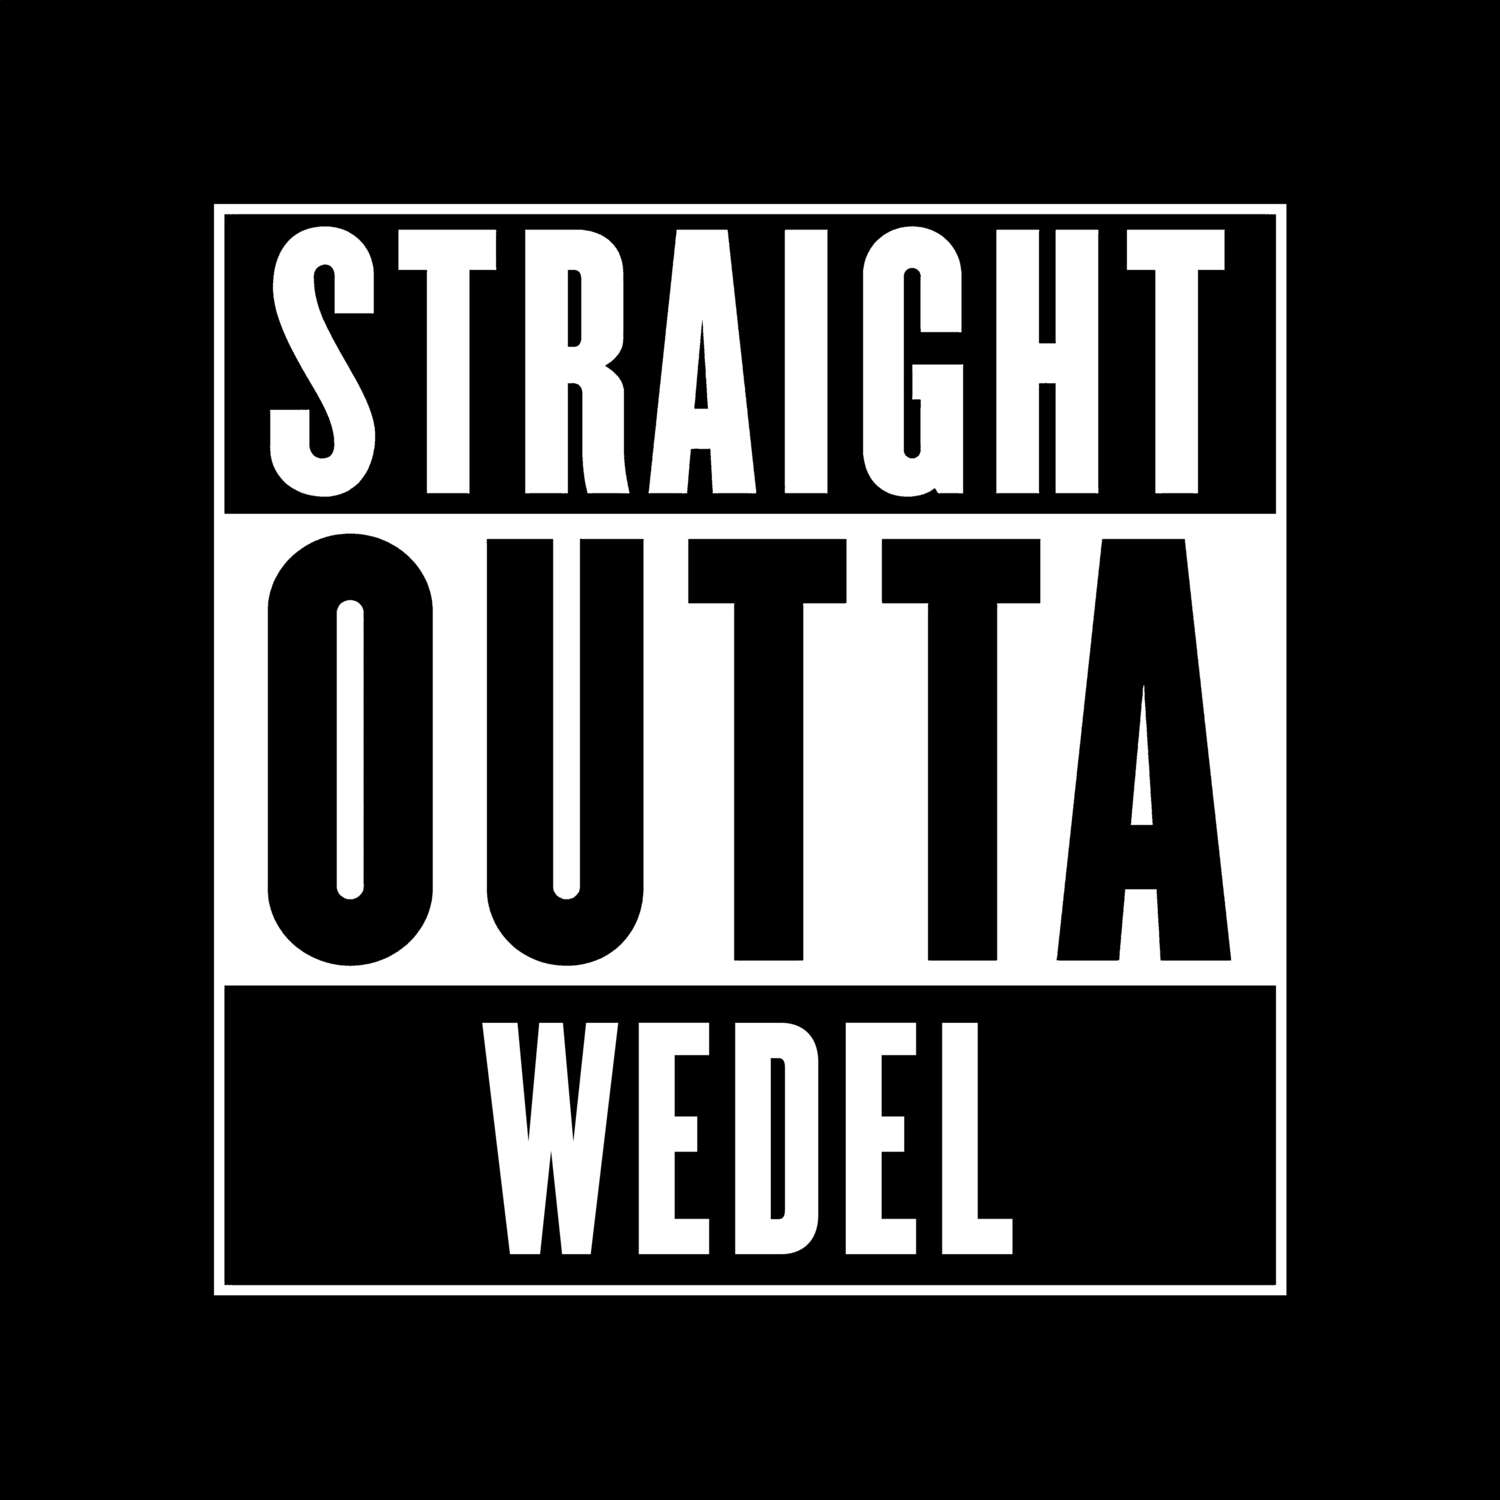 Wedel T-Shirt »Straight Outta«